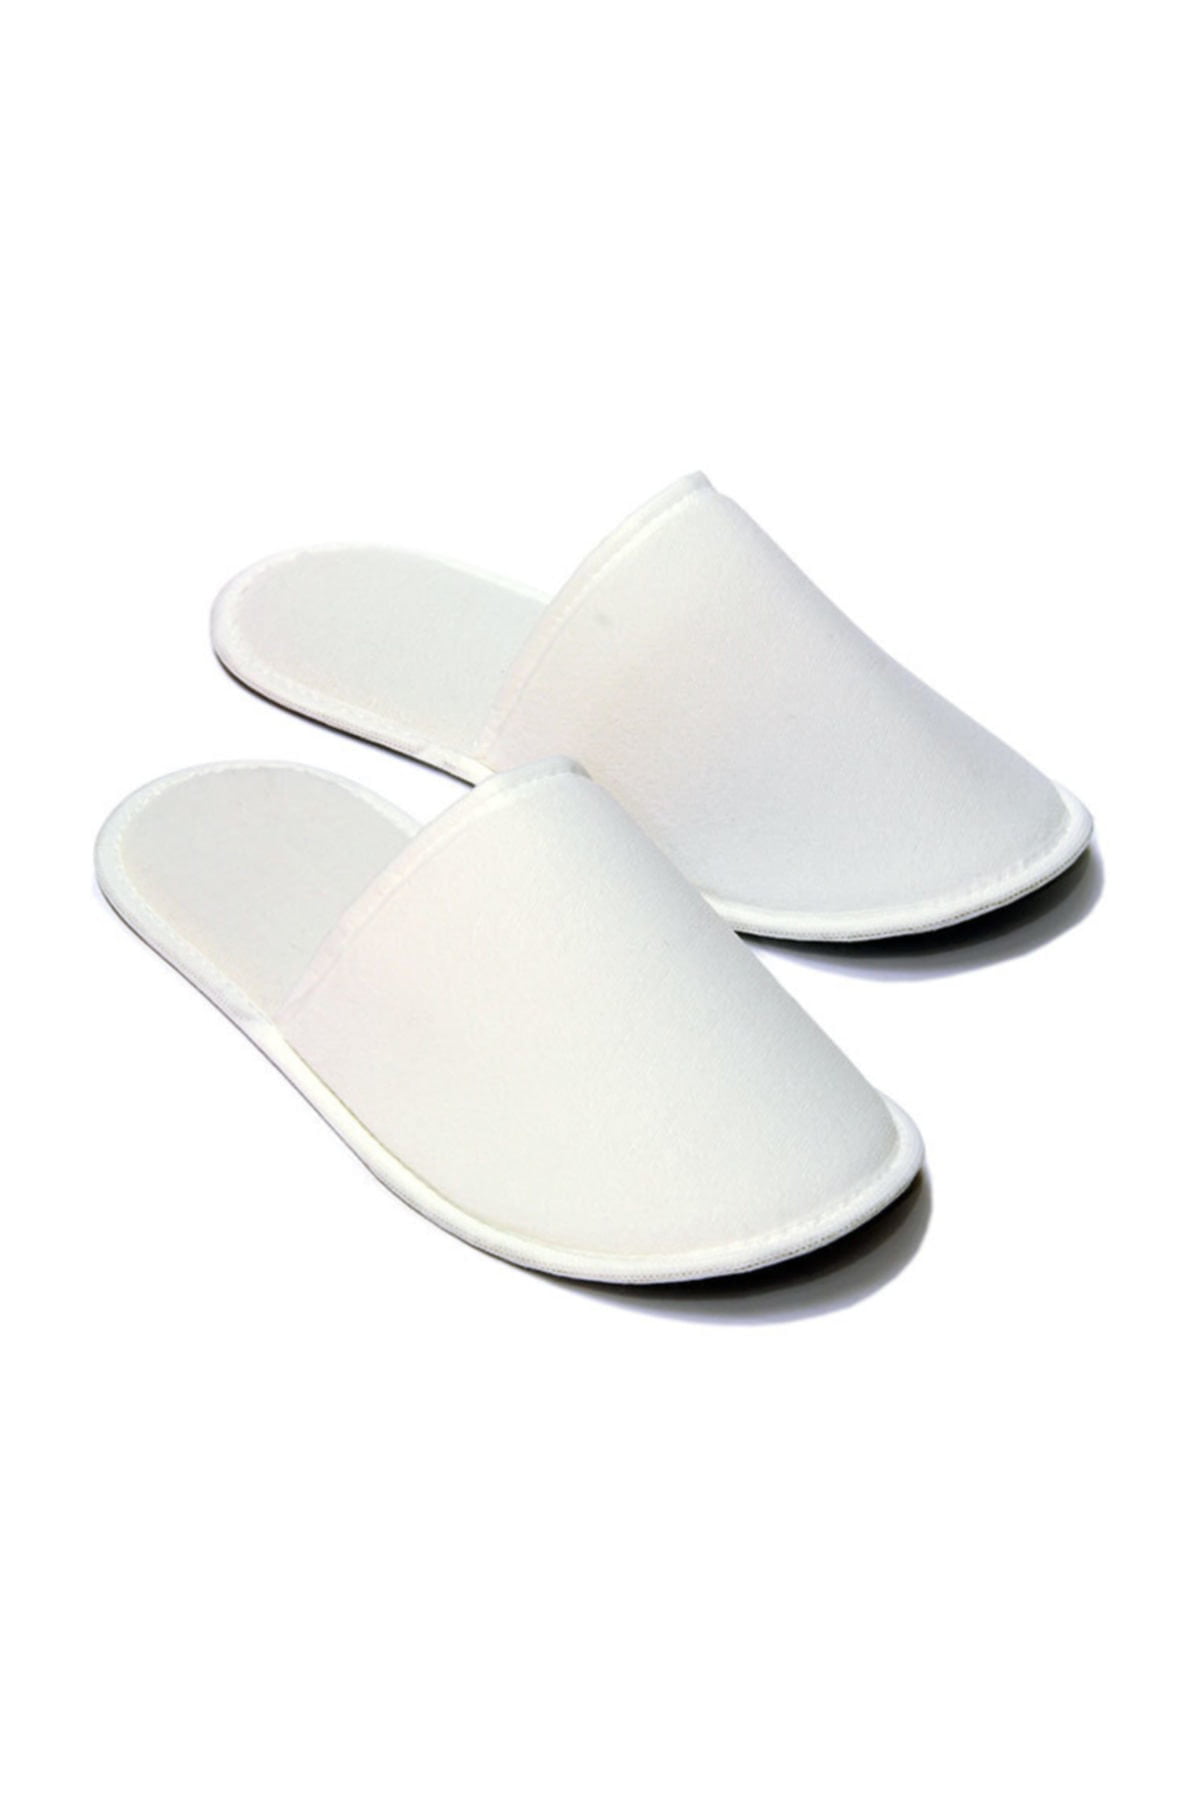 Men Women Unisex Non-woven Fabric Spa Hotel Home Clubs Disposable Slippers 